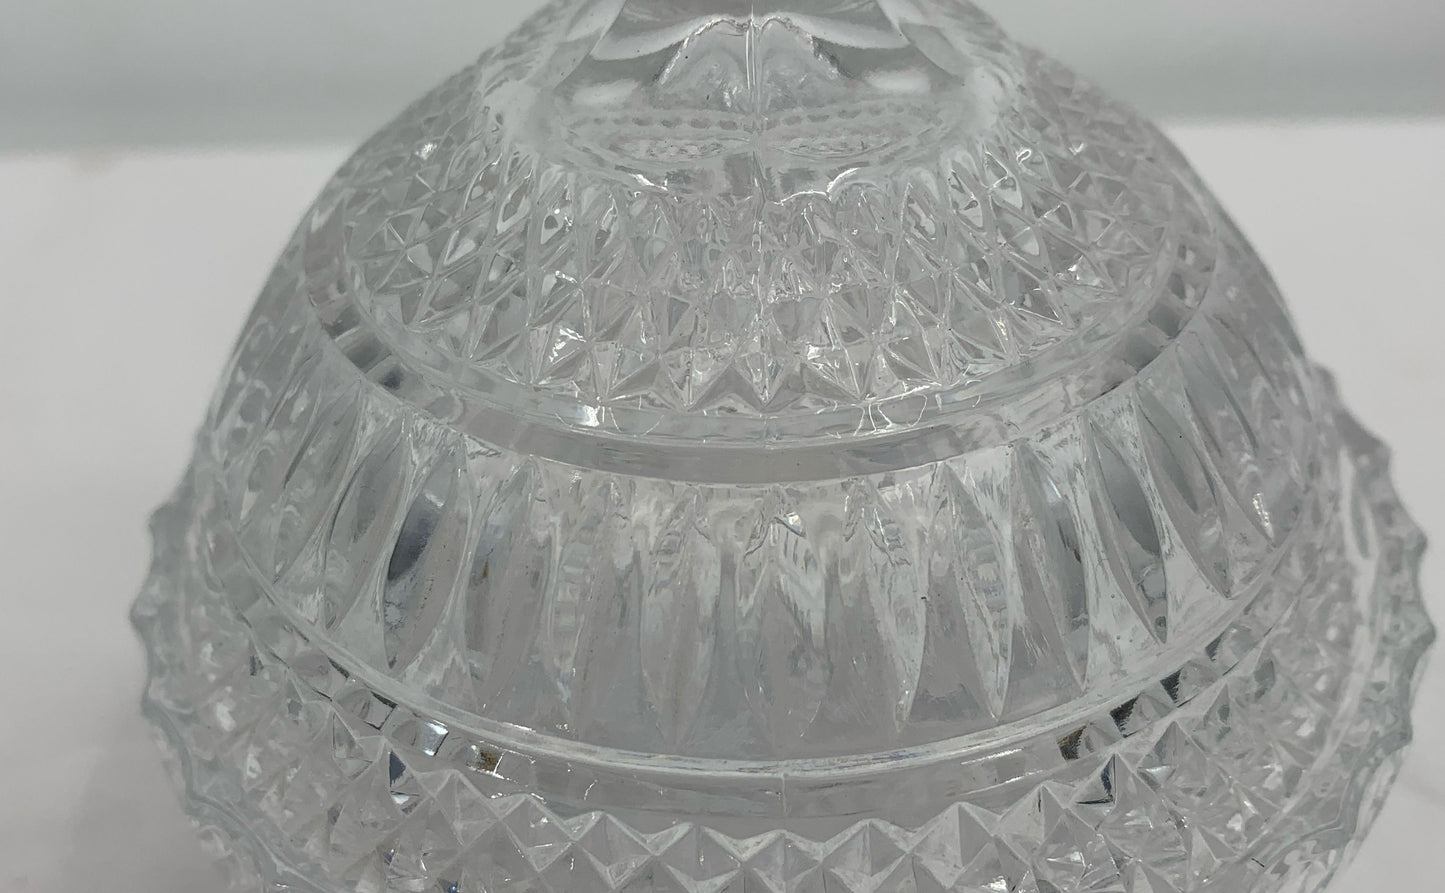 Bleikristall 24% Crystal Candy Dish With Lid Bavaria Germany